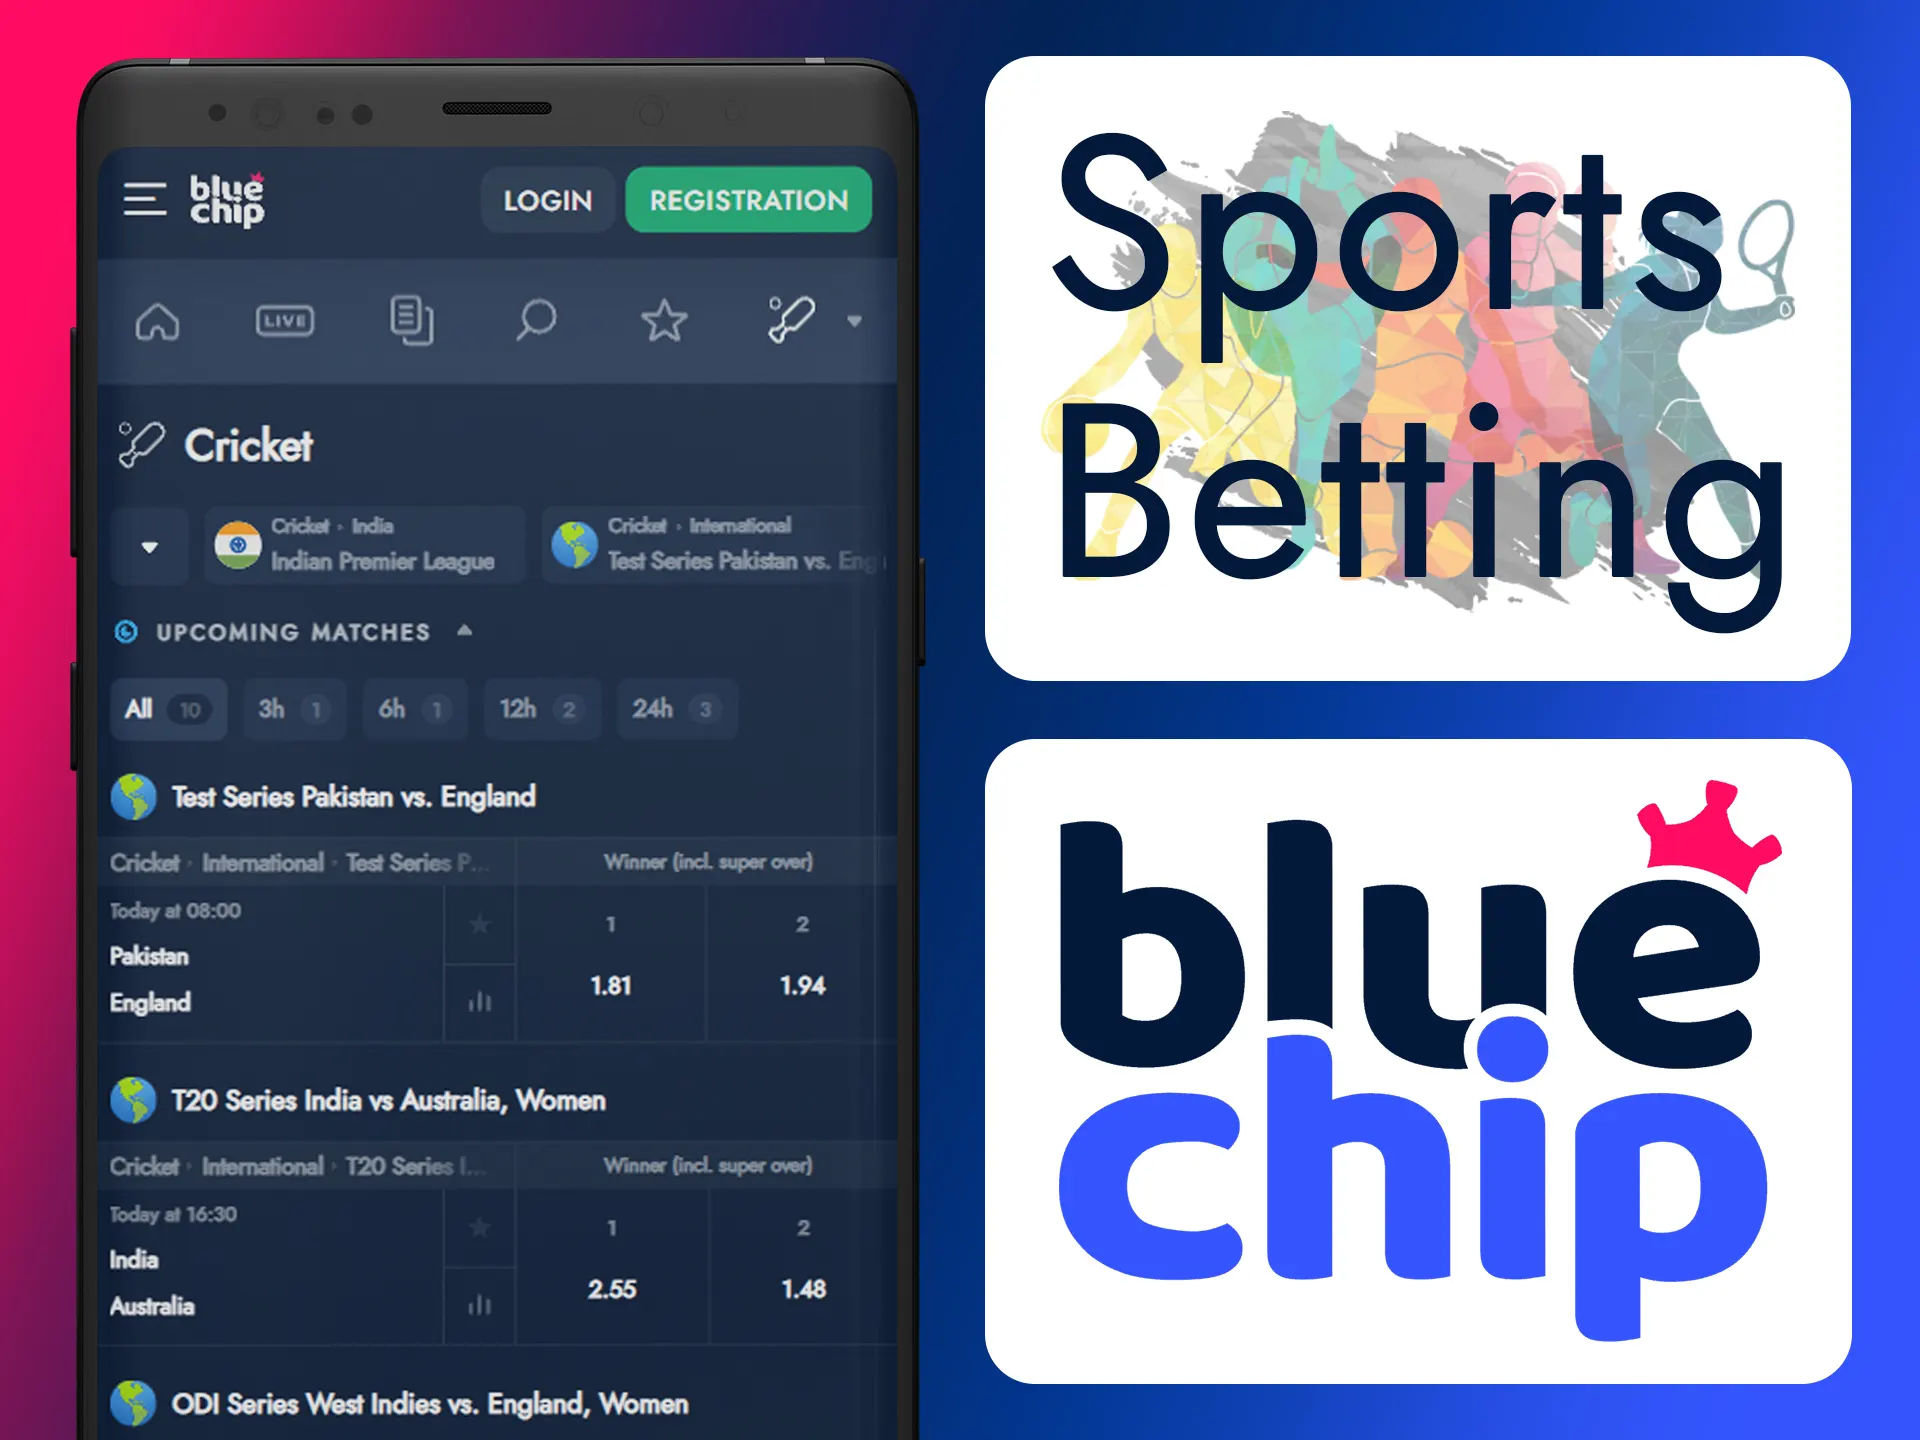 All of the sports available for bet on in your pocket.